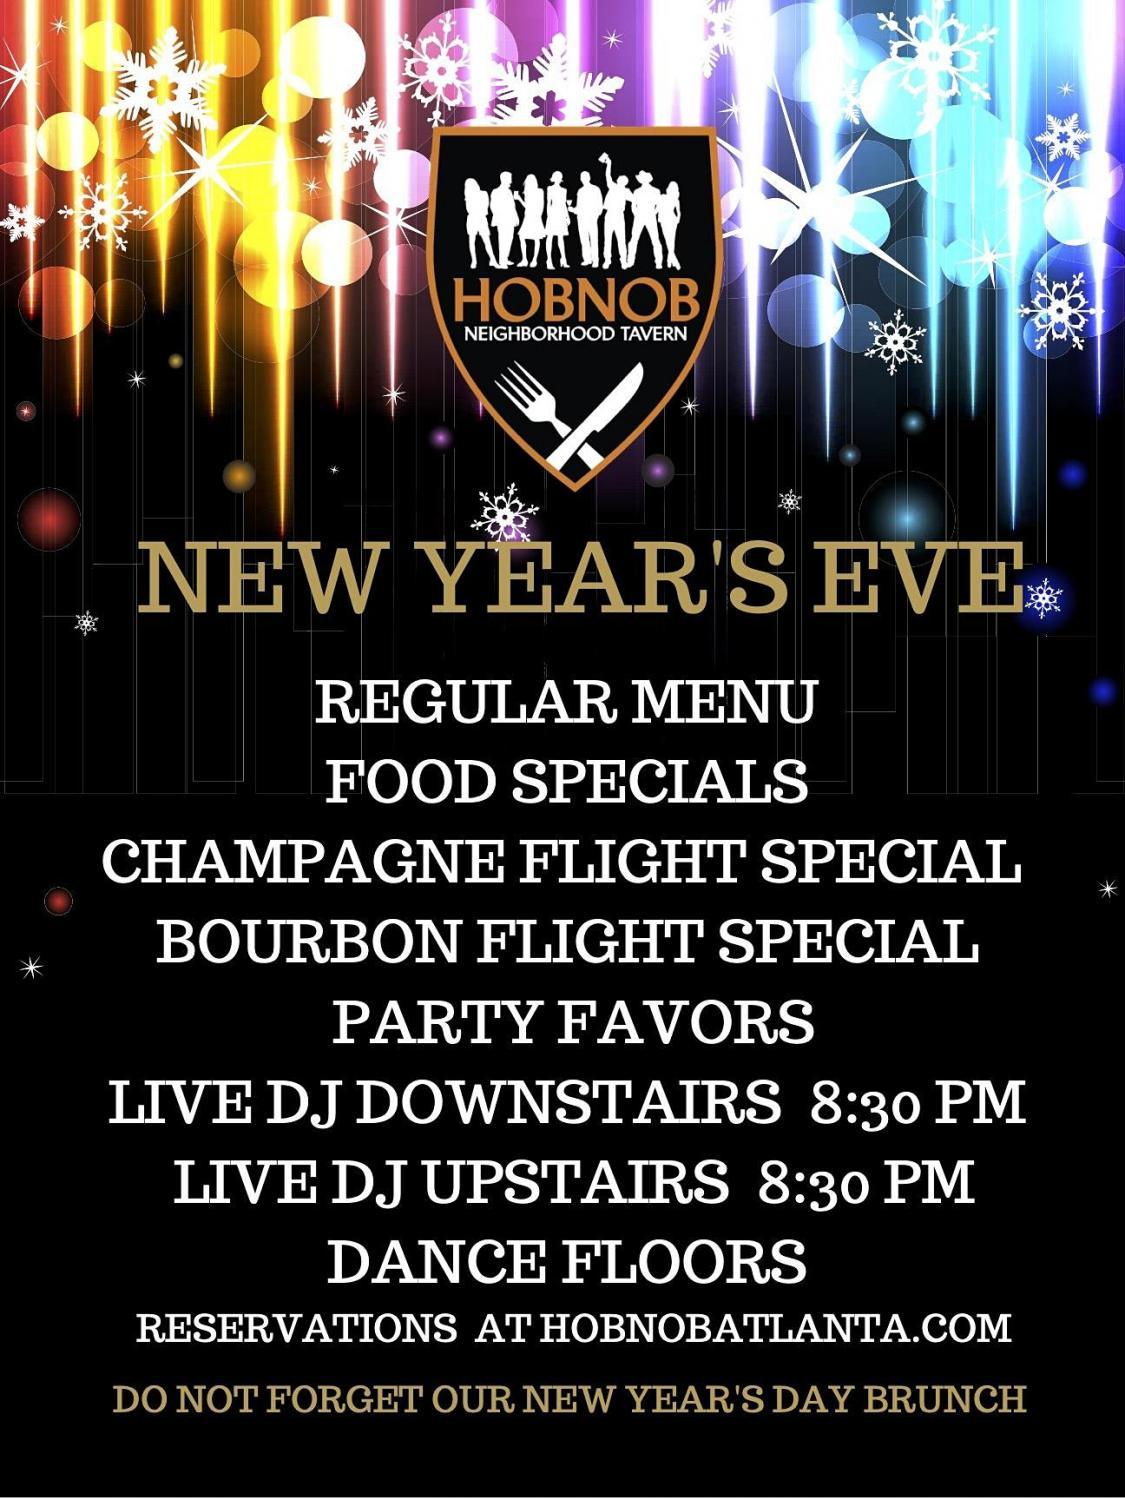 NEW YEARS EVE PARTY AT HALCYON HOBNOB/FREE ENTRY